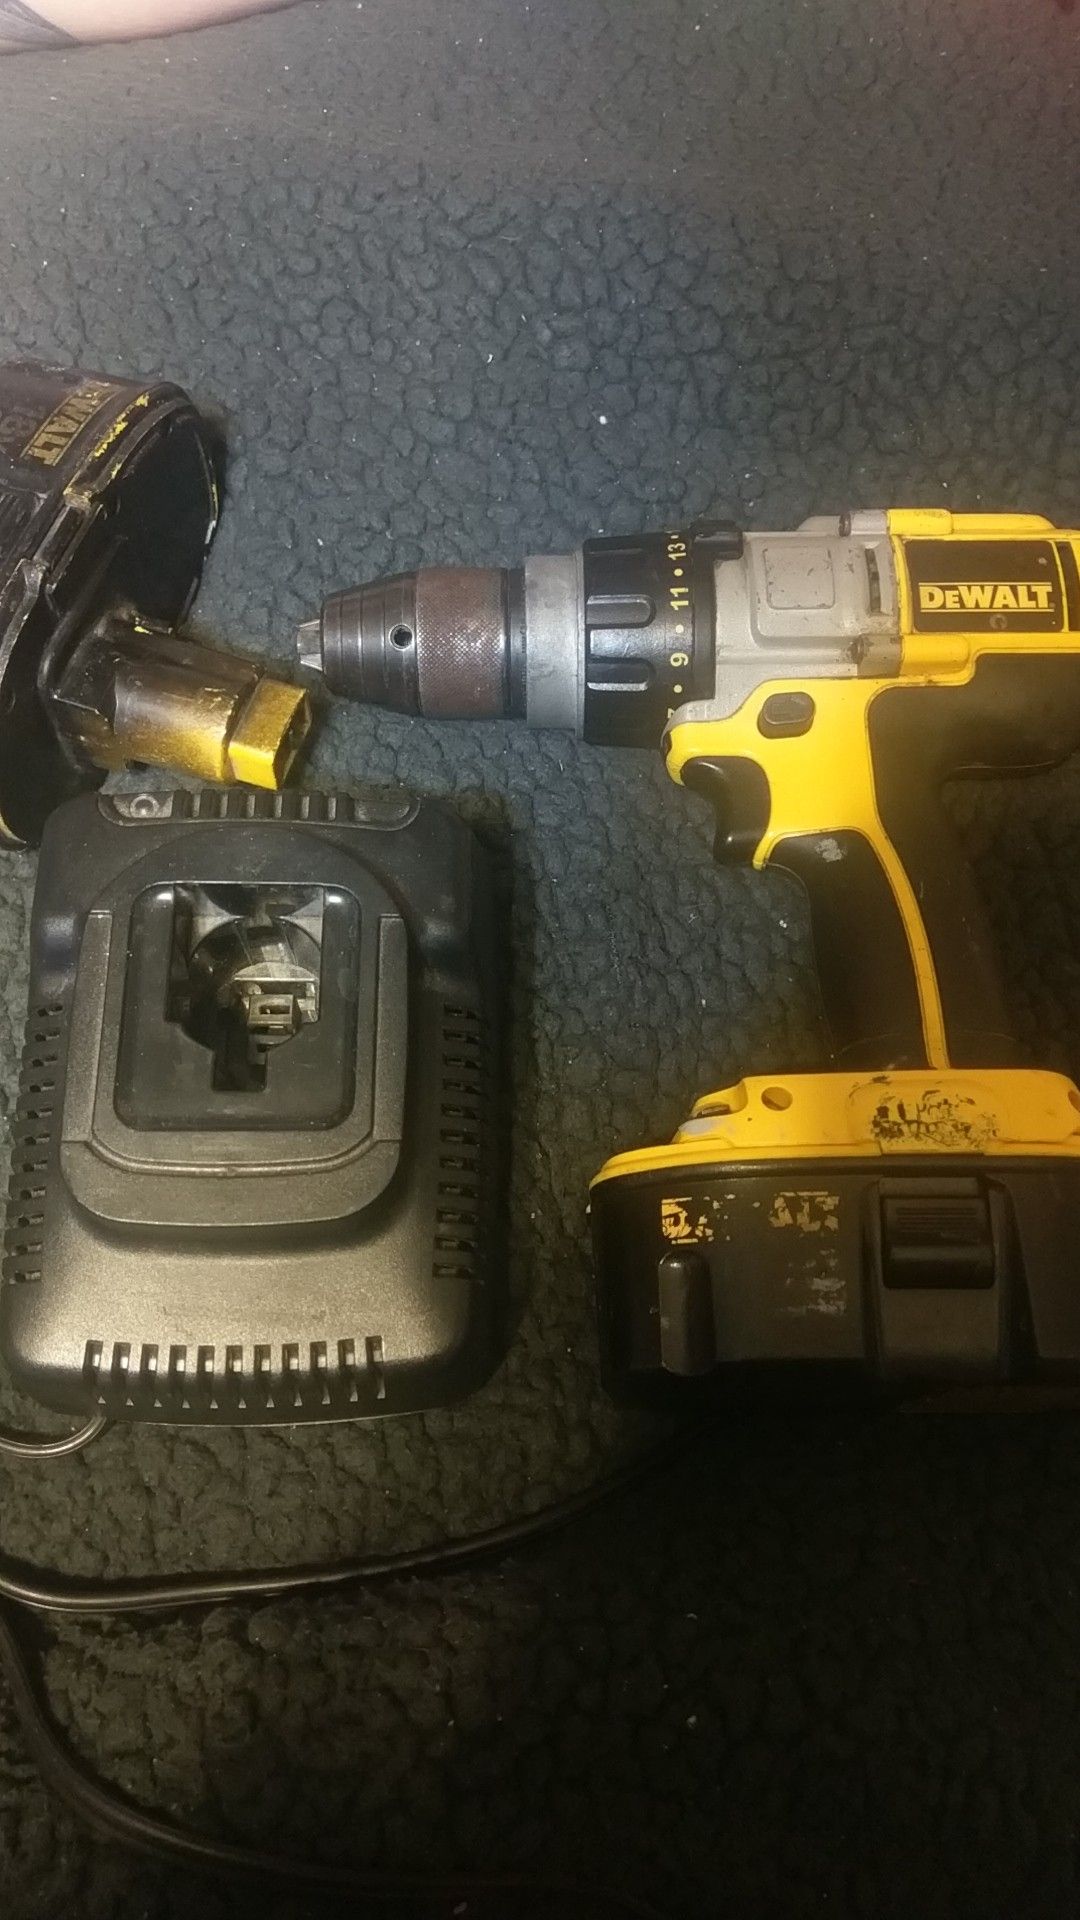 18v DeWalt drill, 2 batteries, and a charger